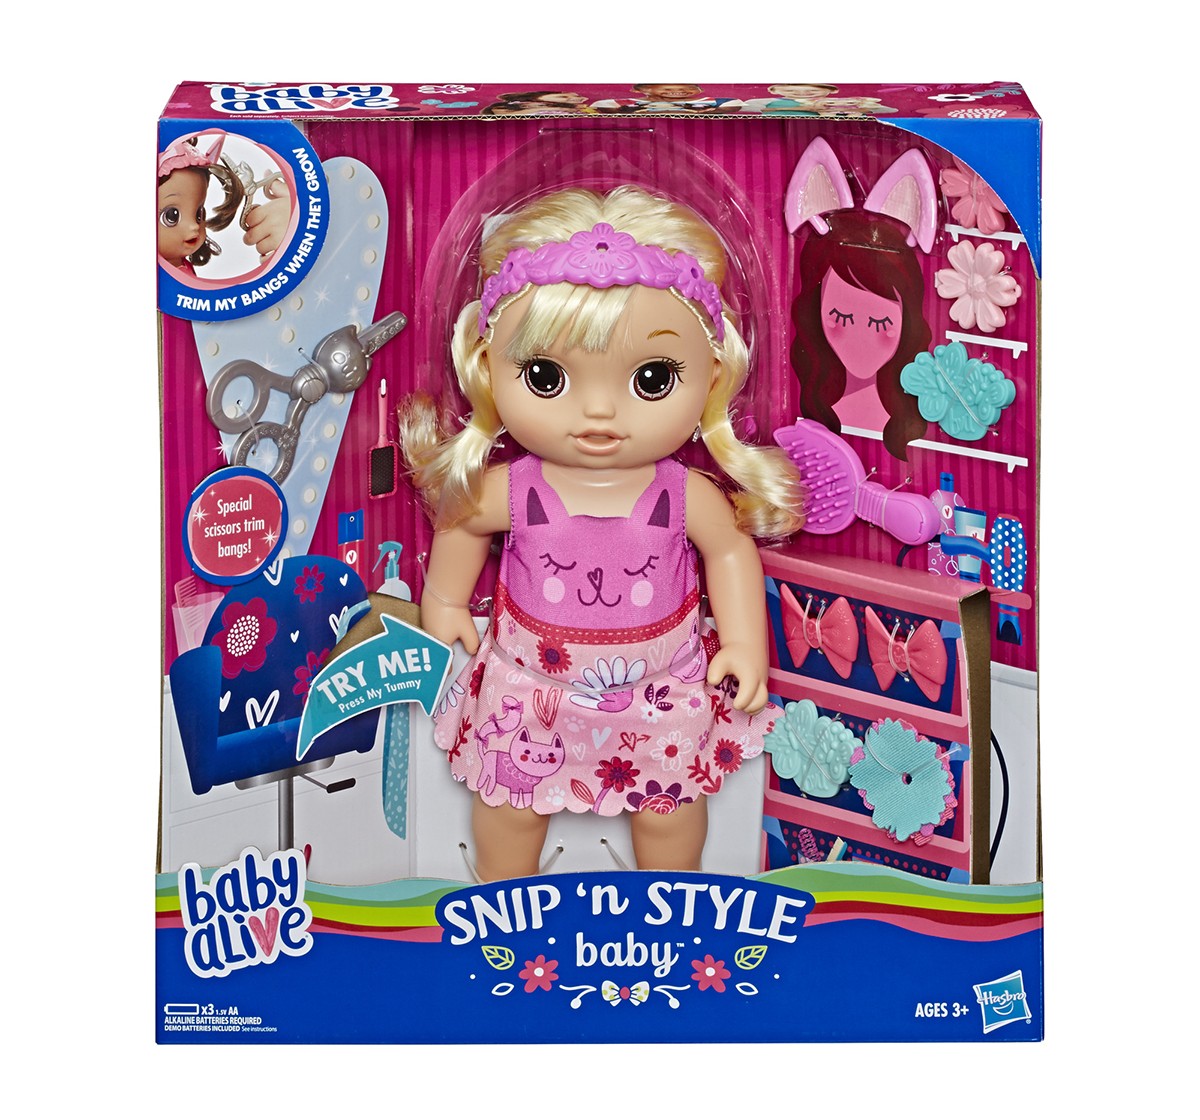 Baby Alive Snip ‘N Style Baby Blonde Hair Talking Doll & Accessories for age 3Y+ 